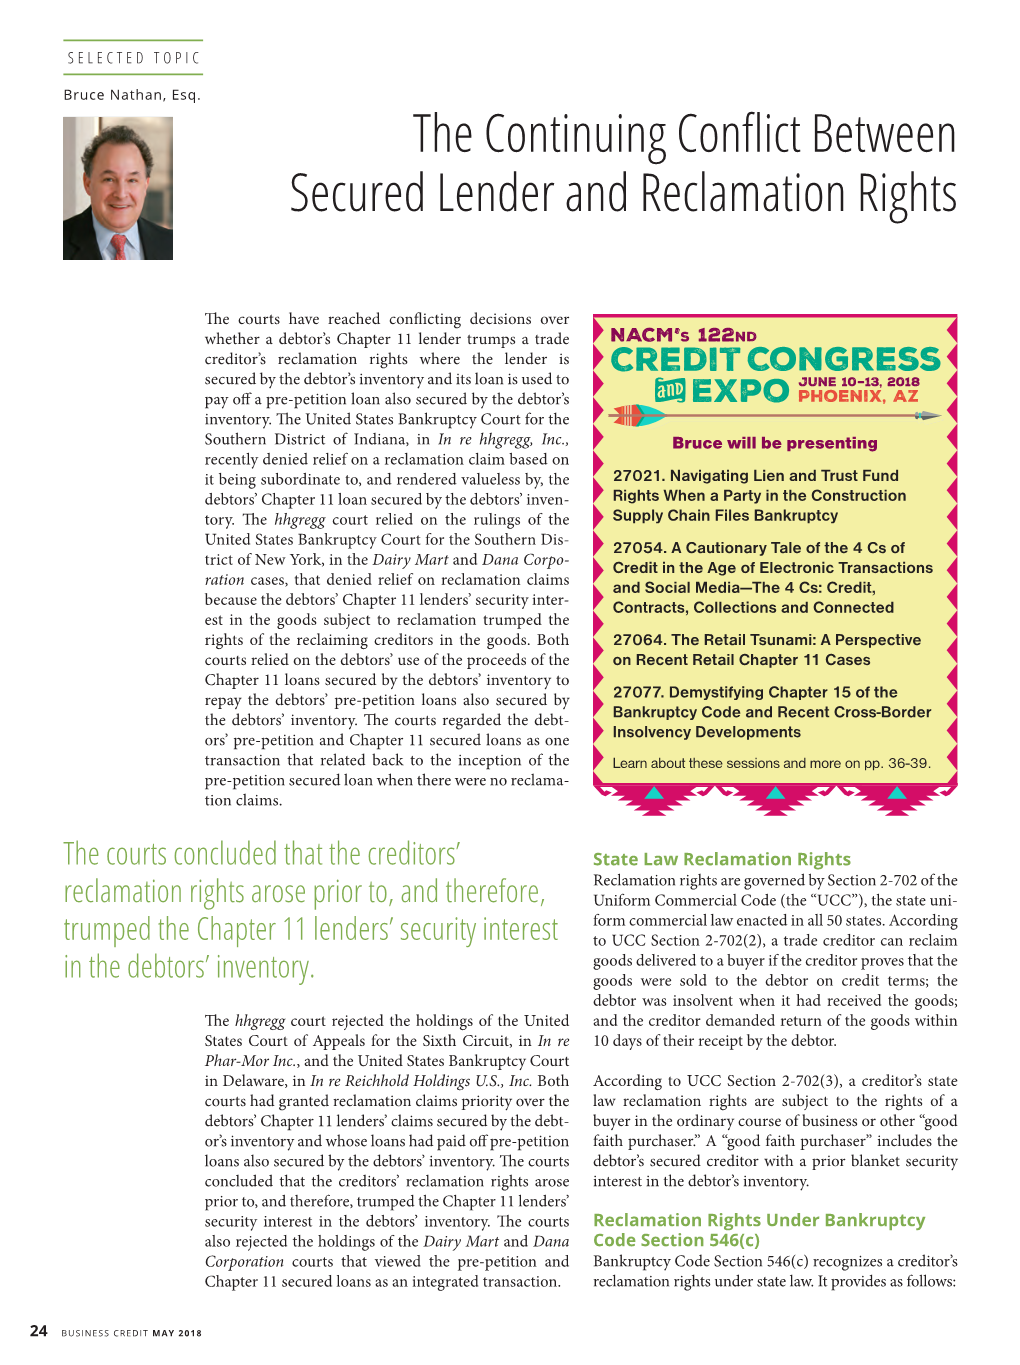 The Continuing Conflict Between Secured Lender and Reclamation Rights